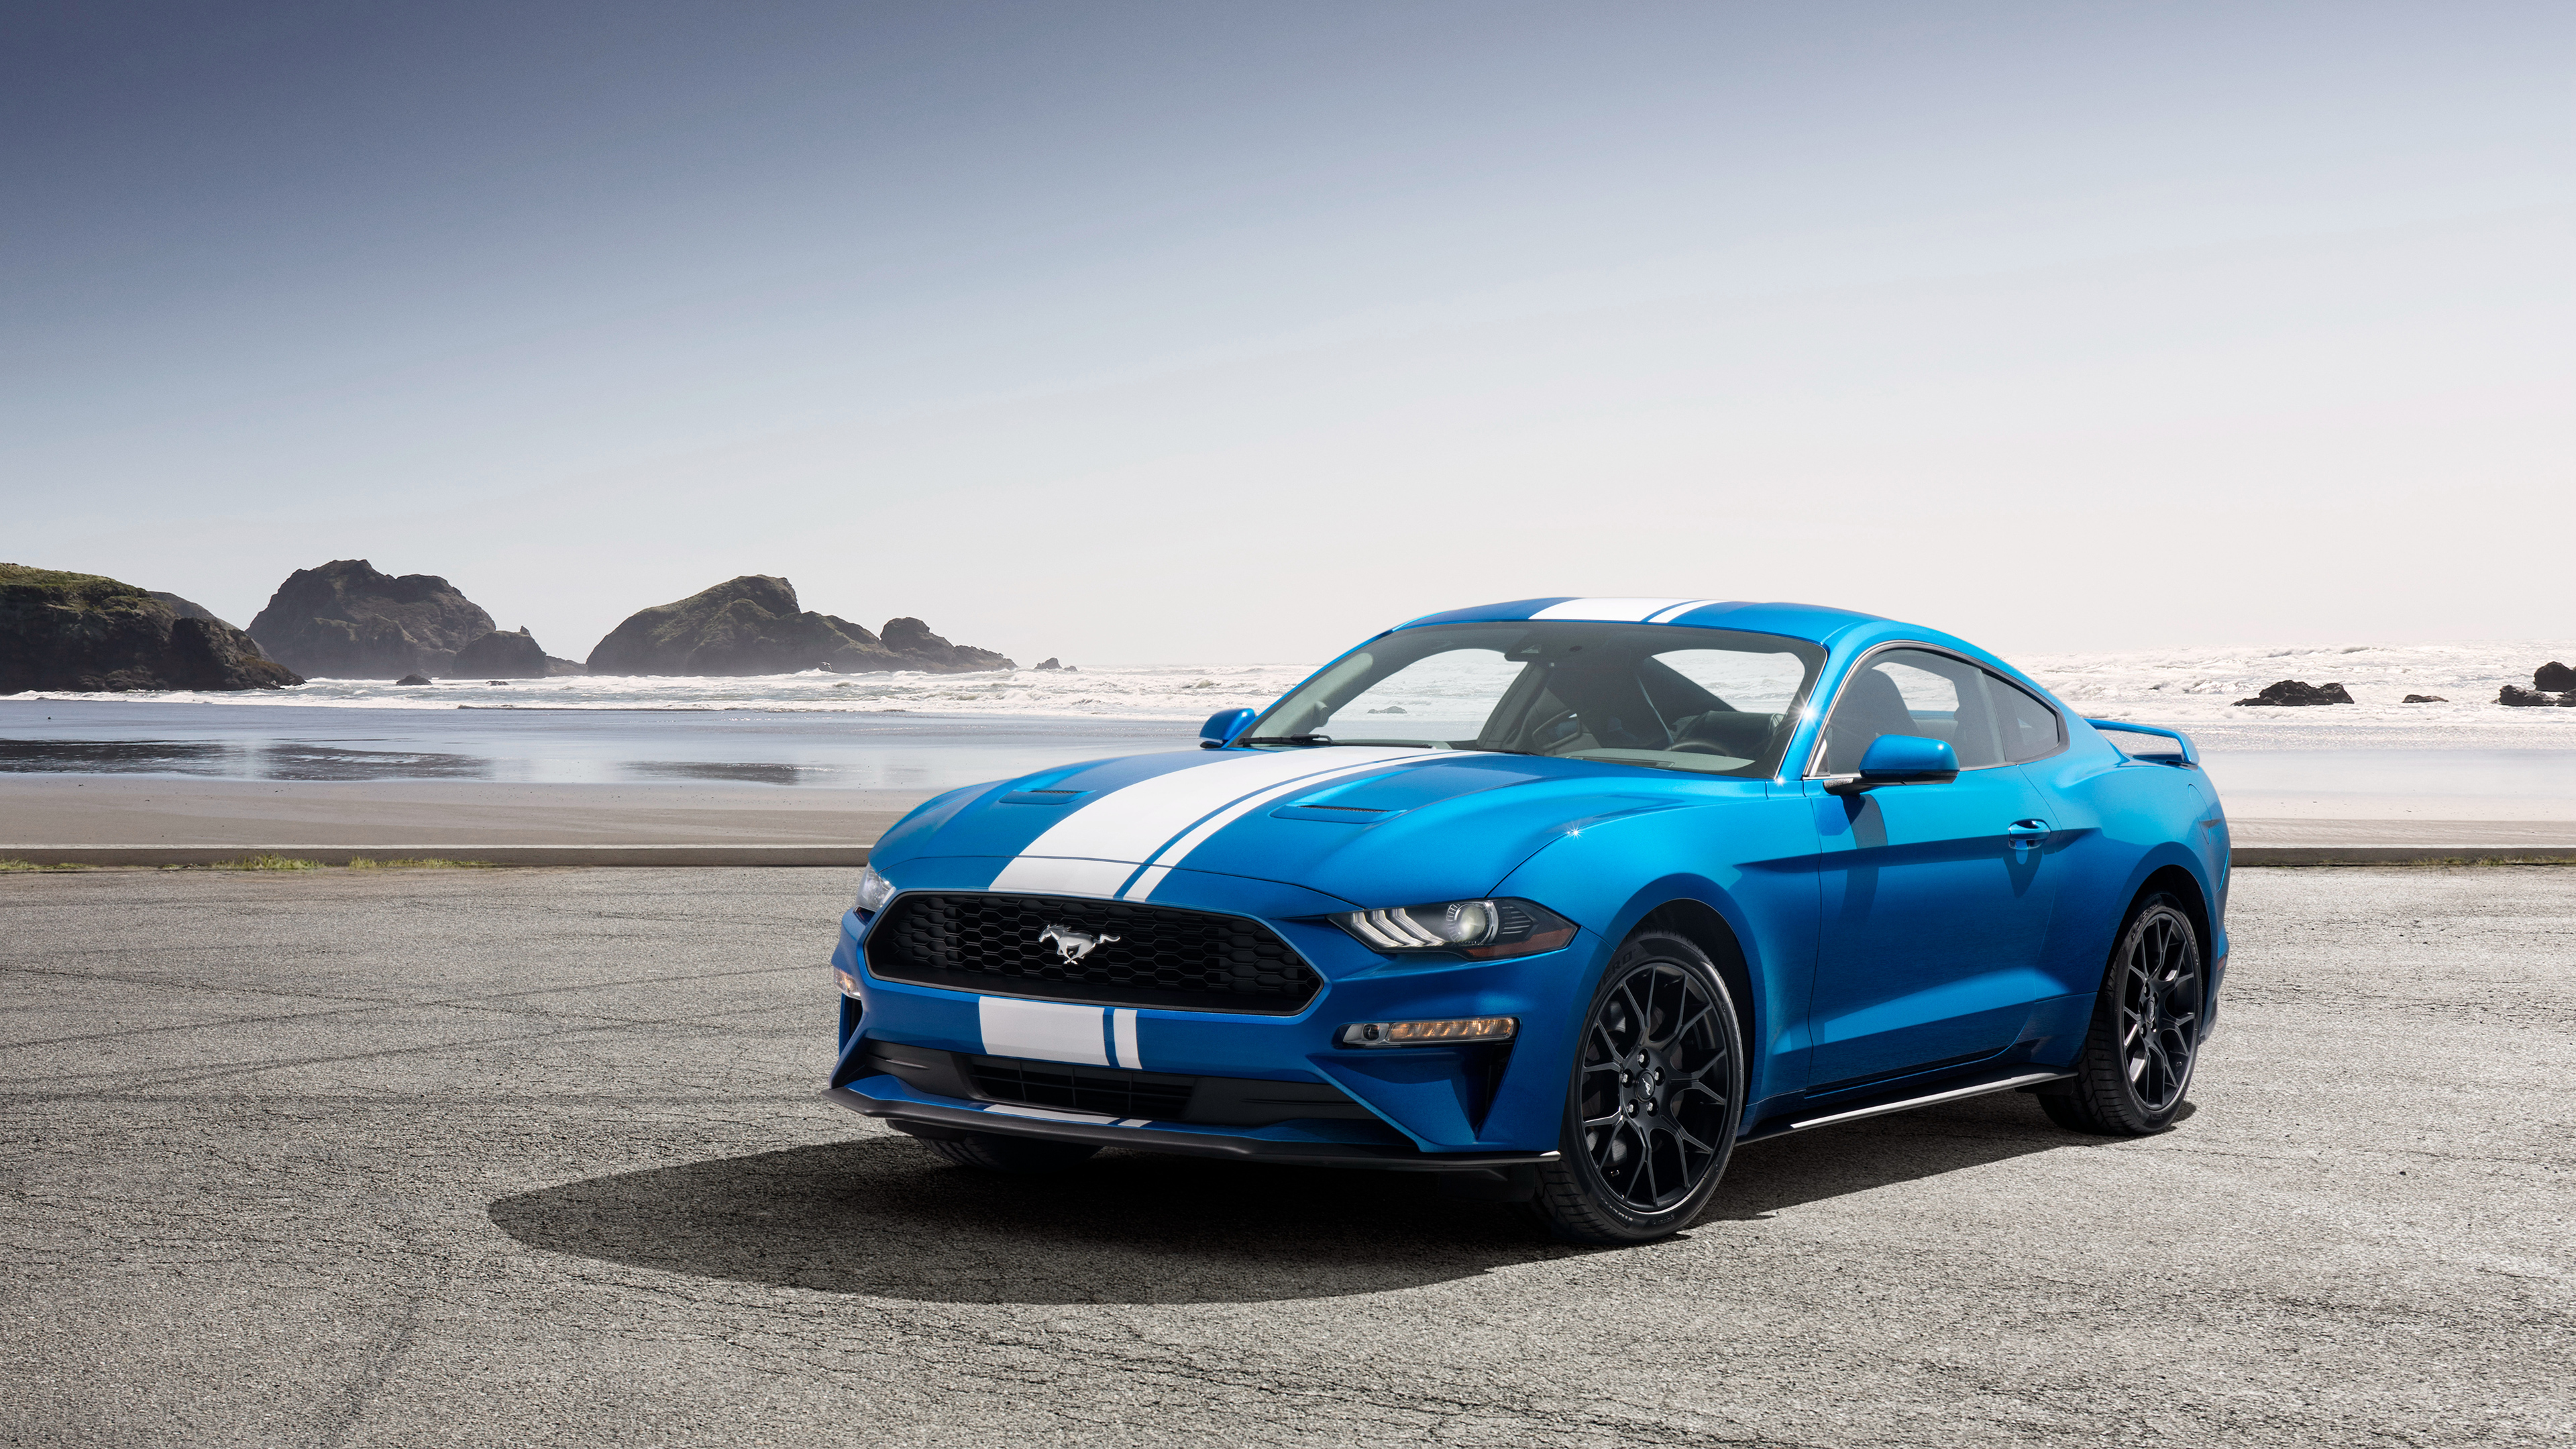 Fast car Ford Mustang EcoBoost, 2019 Desktop wallpapers 1366x768